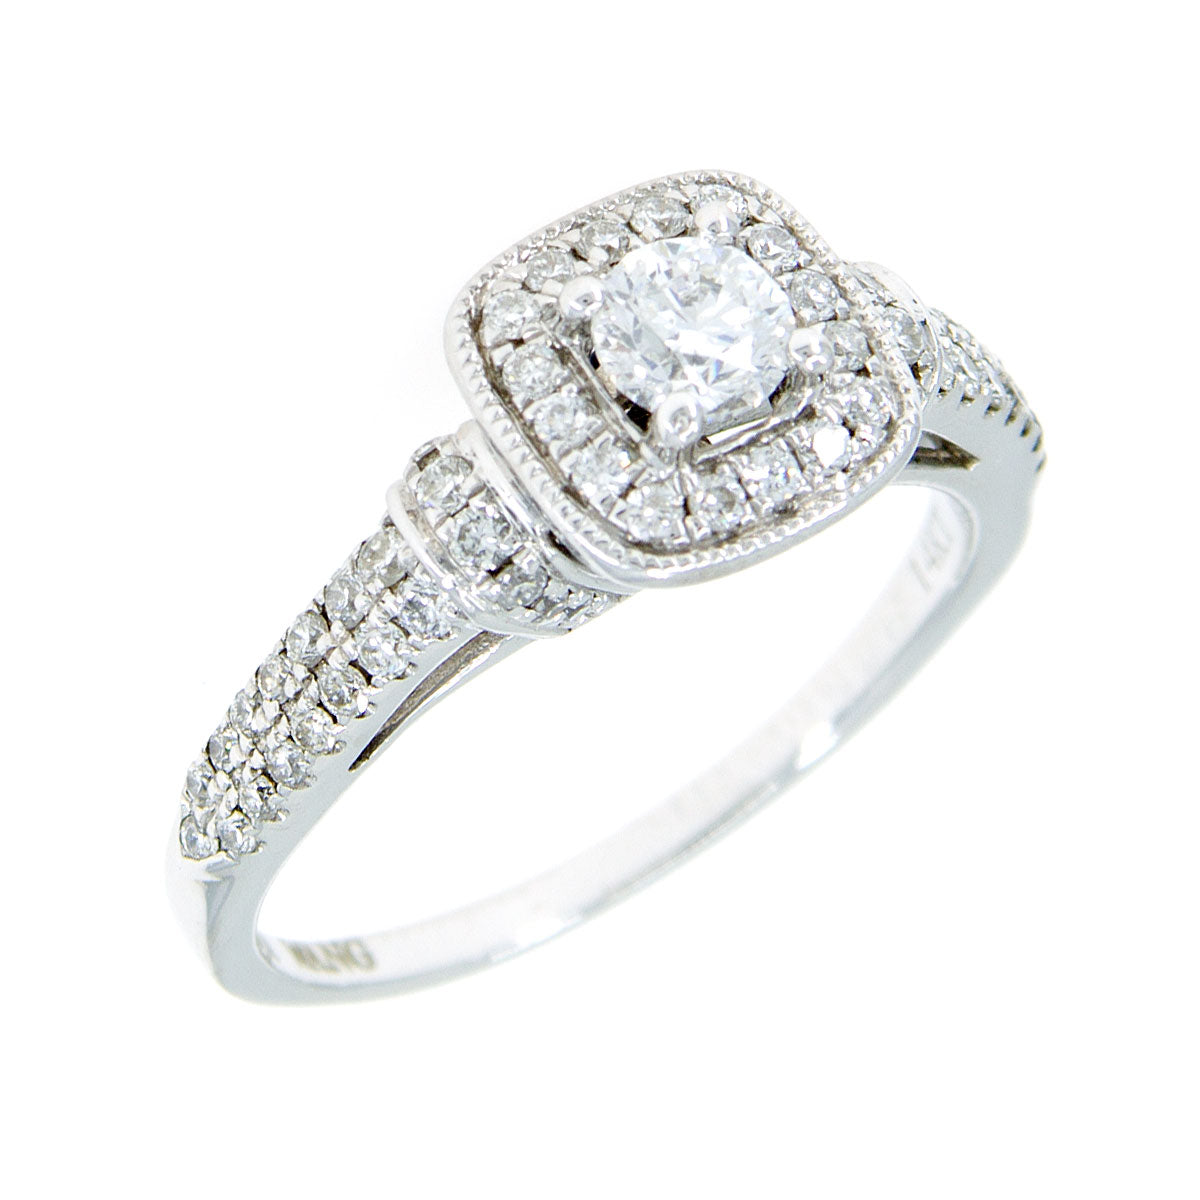 VERA WANG LOVE COLLECTION 1.25 CTW DIAMOND 14K White Gold ENGAGEMENT RING  Size 6 | #1787531024